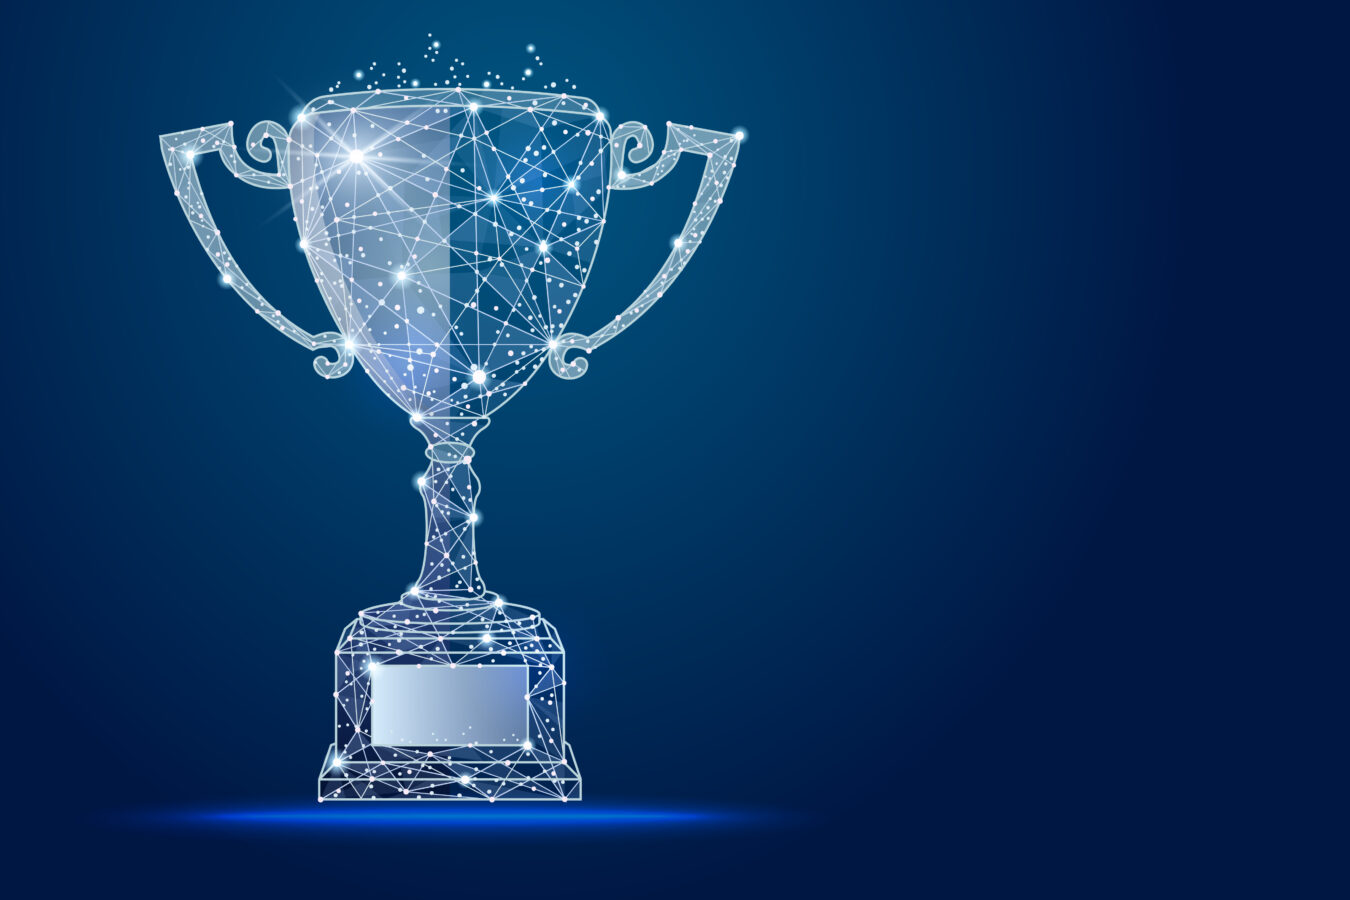 A trophy illustration made for Digital Experience Awards in 2021.